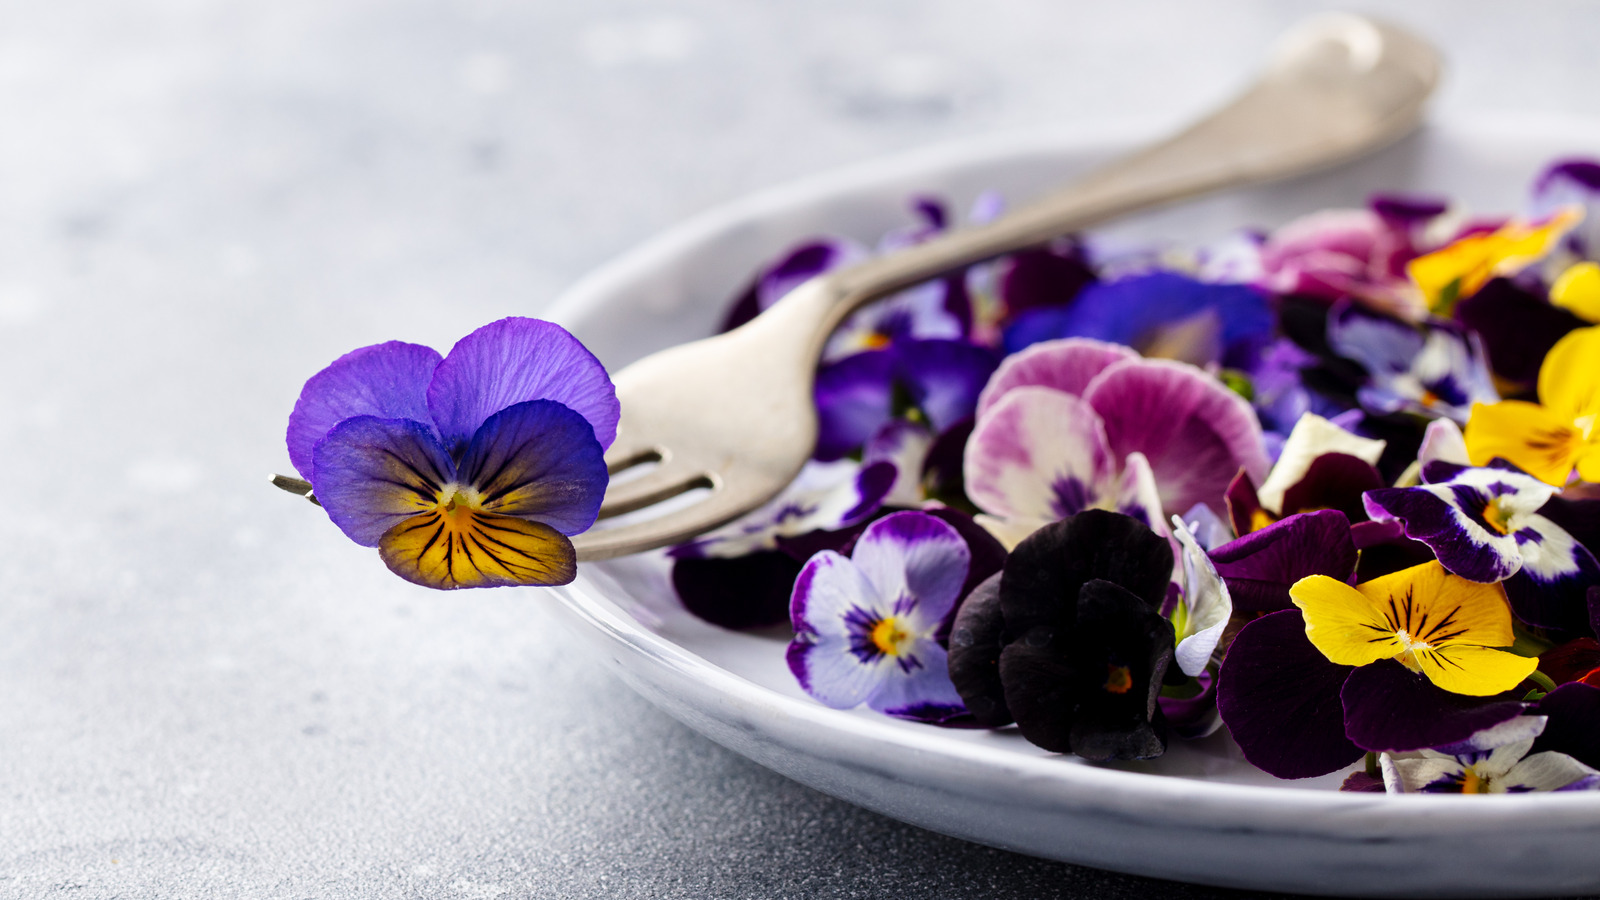 Identifying Edible Flowers & Interesting Facts about them (with